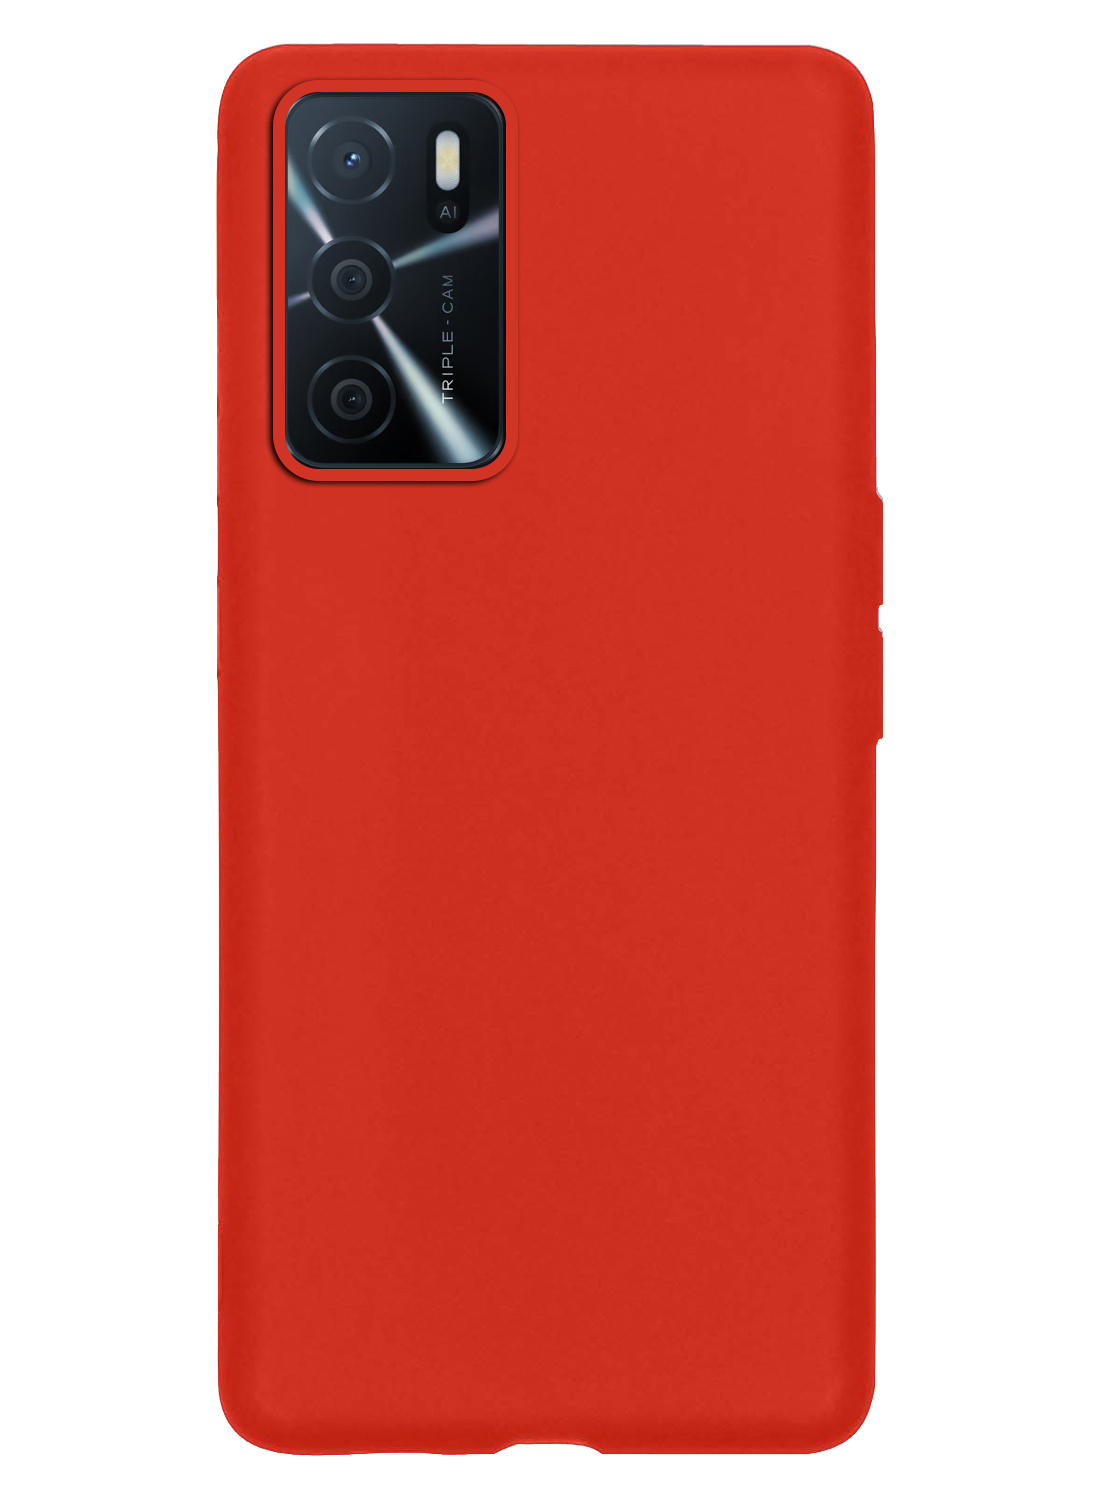 Nomfy OPPO A16 Hoes Cover Siliconen Case - OPPO A16 Hoesje Case Siliconen Hoes Back Cover - Rood